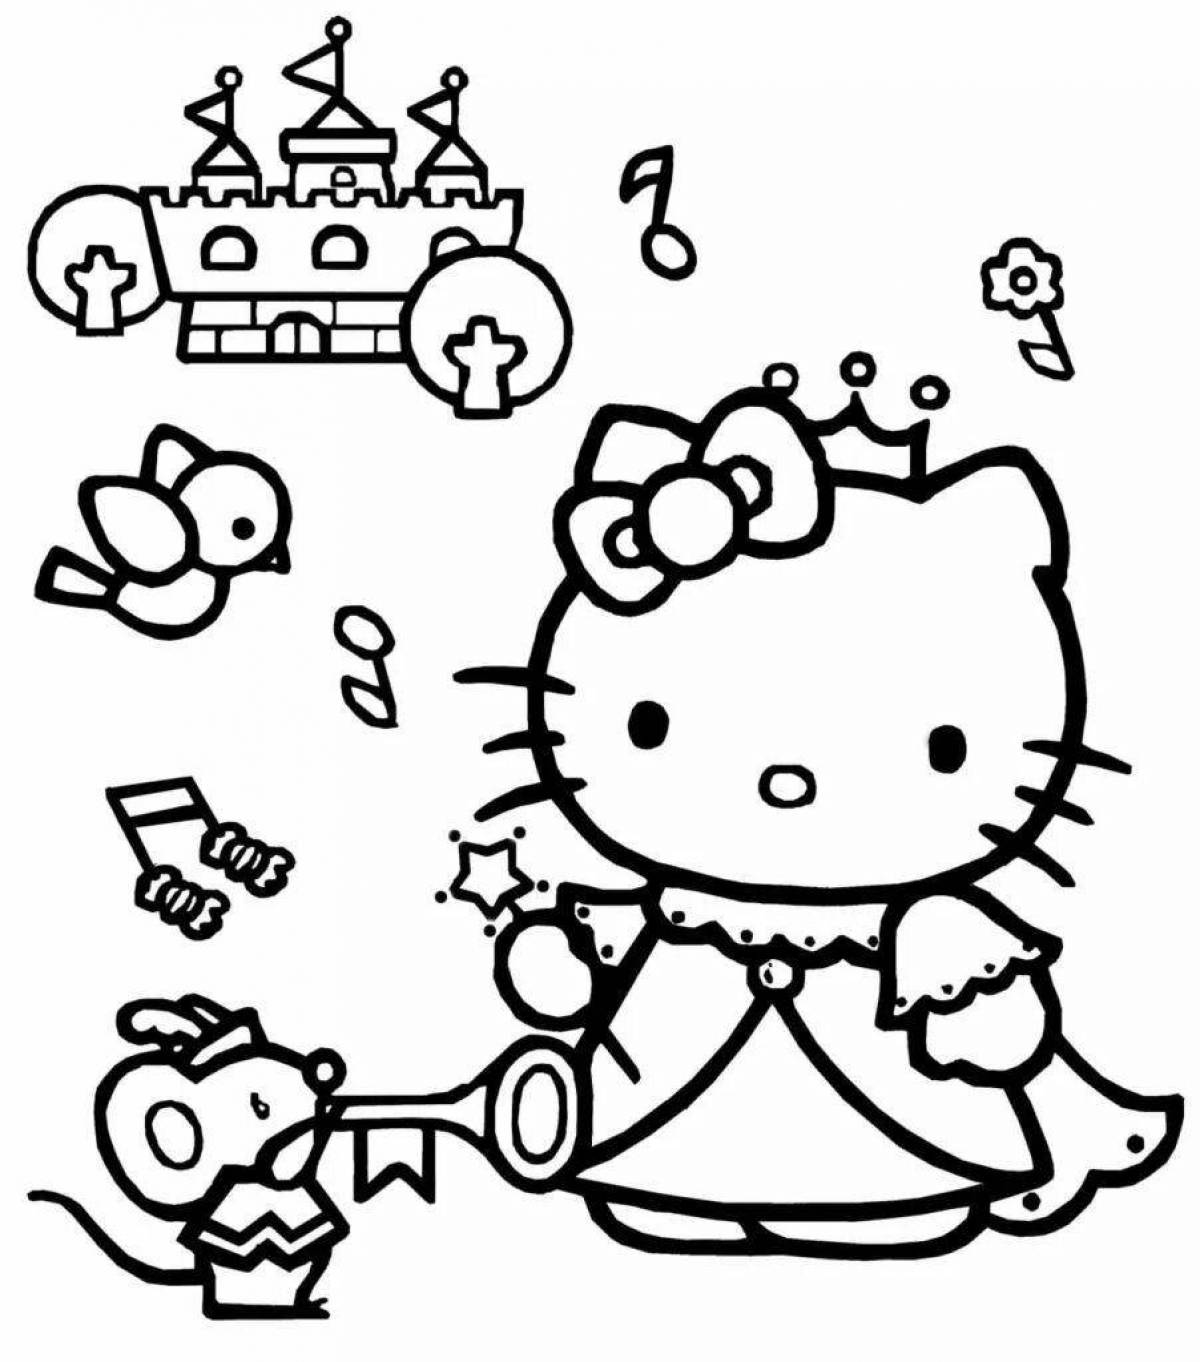 Bright coloring by numbers hello kitty